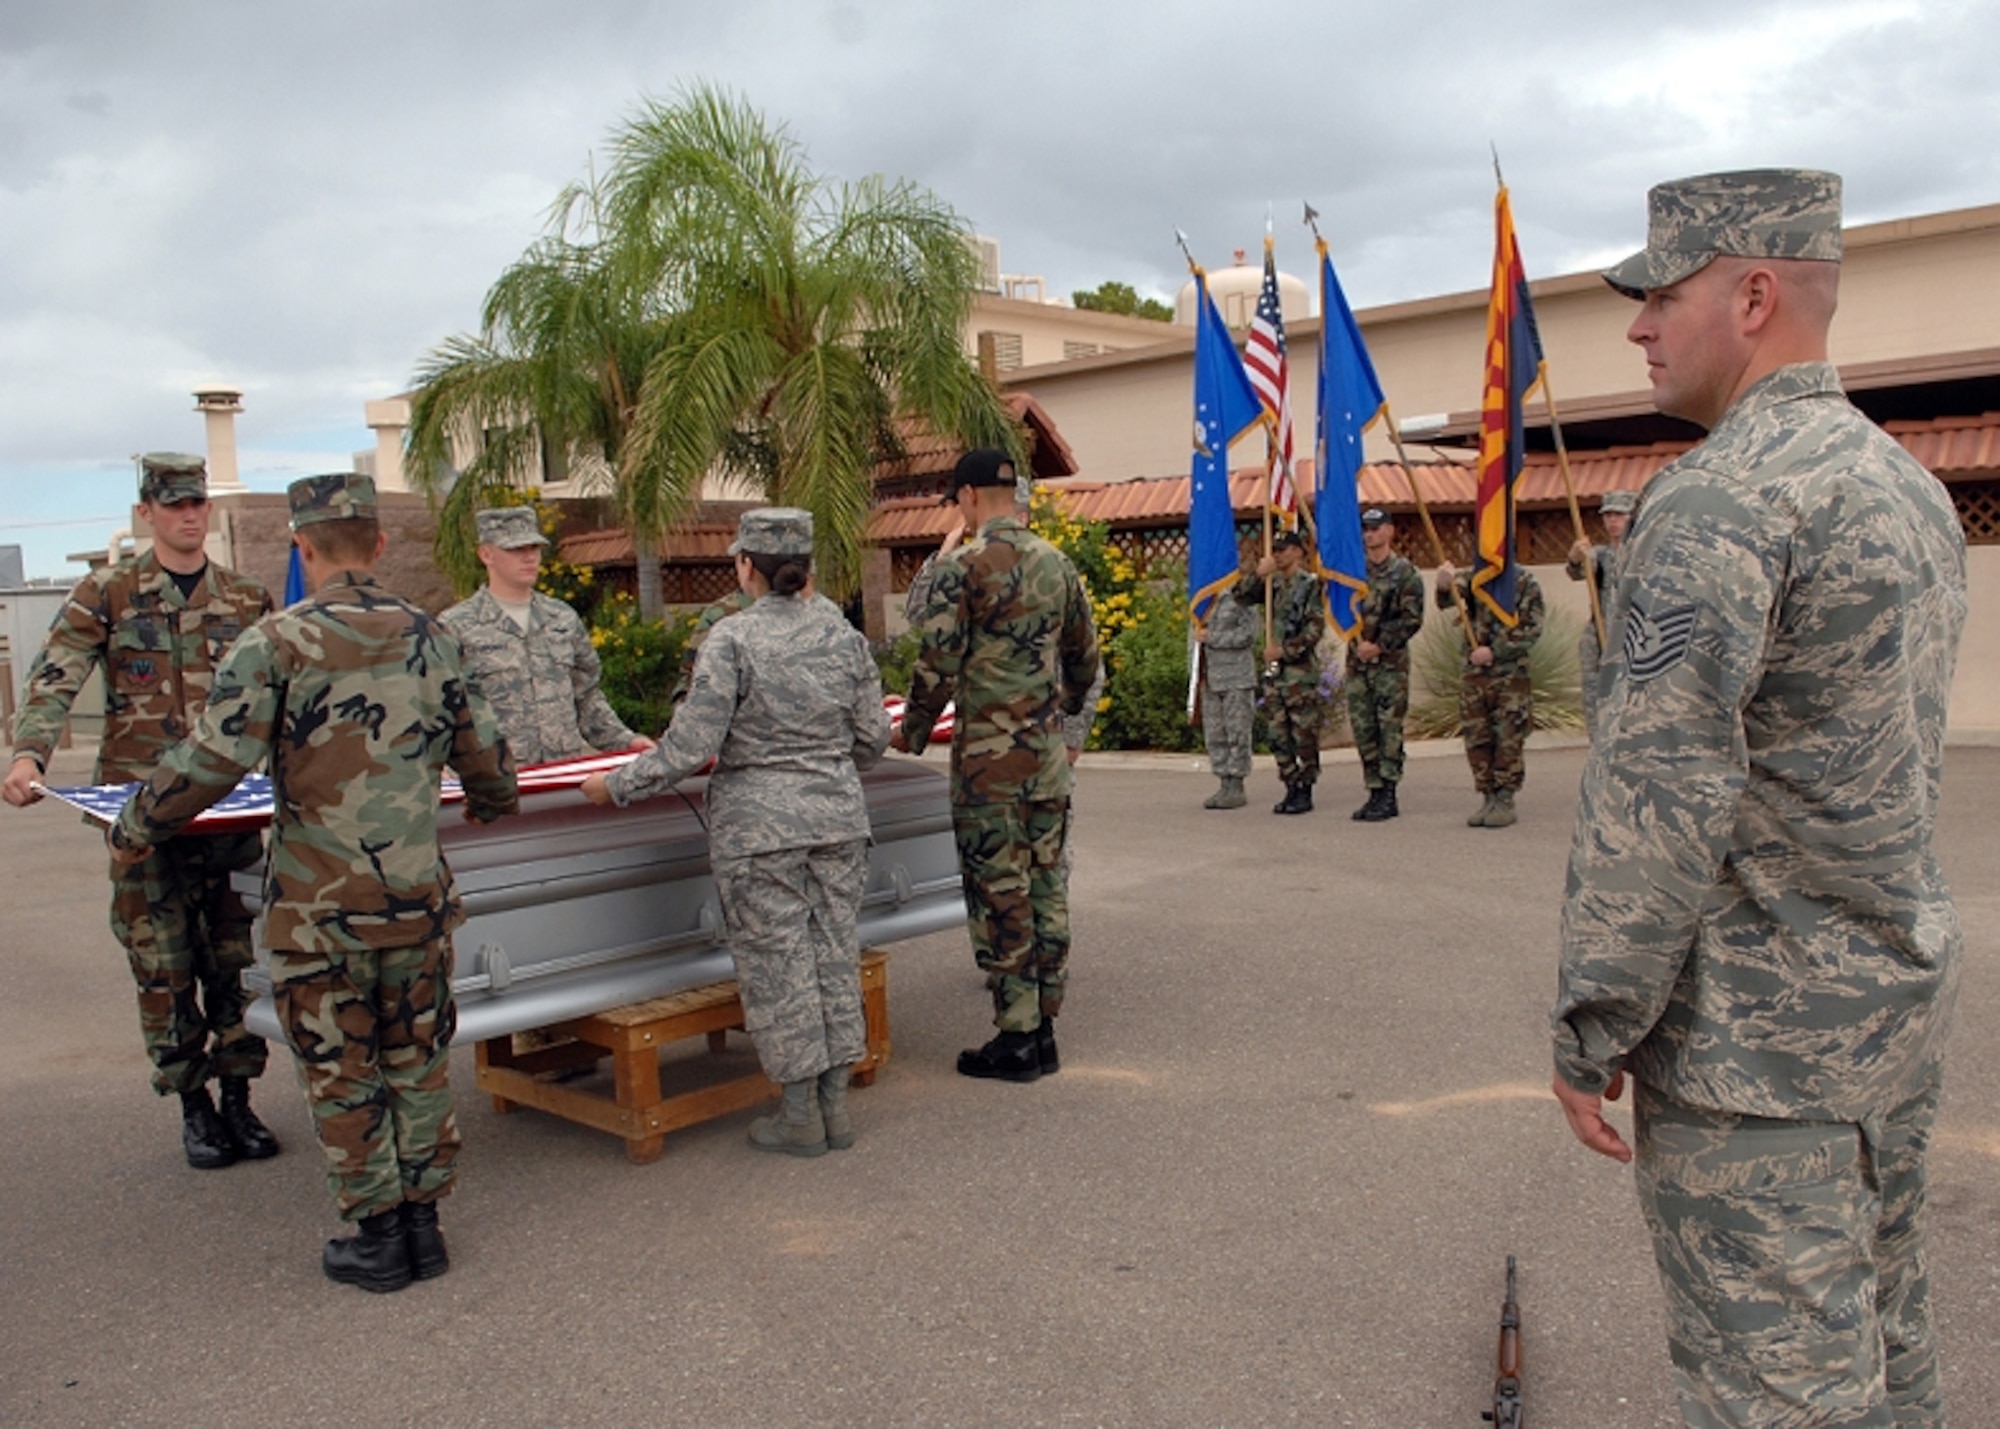 Tech Sgt. Toby Farr, right, U.S. Air Force Honor Guard formal training instructor, watches as base honor guardsmen practice a funeral sequence during a training visit to Davis-Monthan Air Force Base, Ariz. (Photo courtesy of U.S. Air Force Honor Guard)